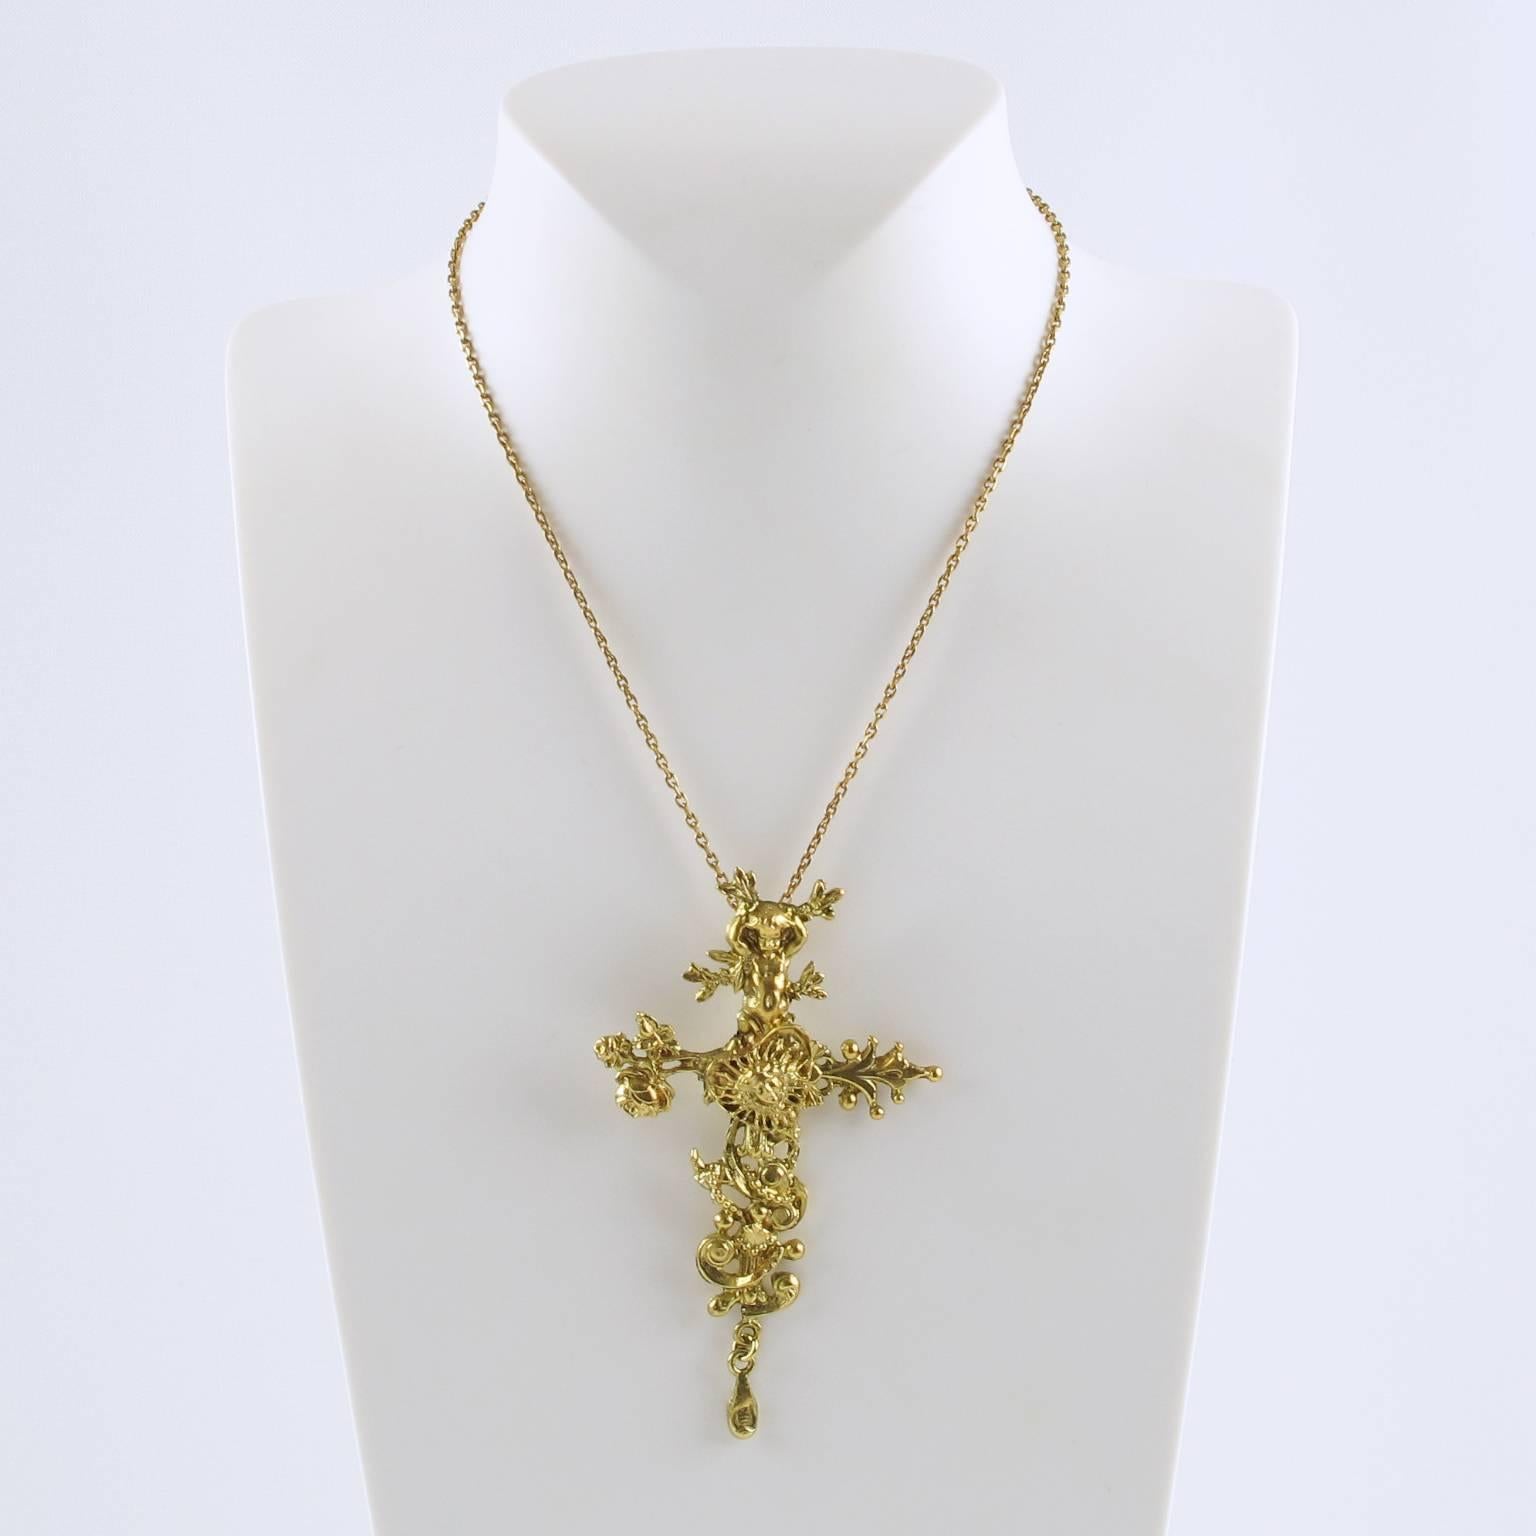 Vintage 1990s Christian Lacroix Paris rare gilt metal pendant necklace featuring a gorgeous detailed and textured cross with dangling charm, topped with a cherub, a heart and the allegorical portrait of the King Louis XIV, founder of the Comedie